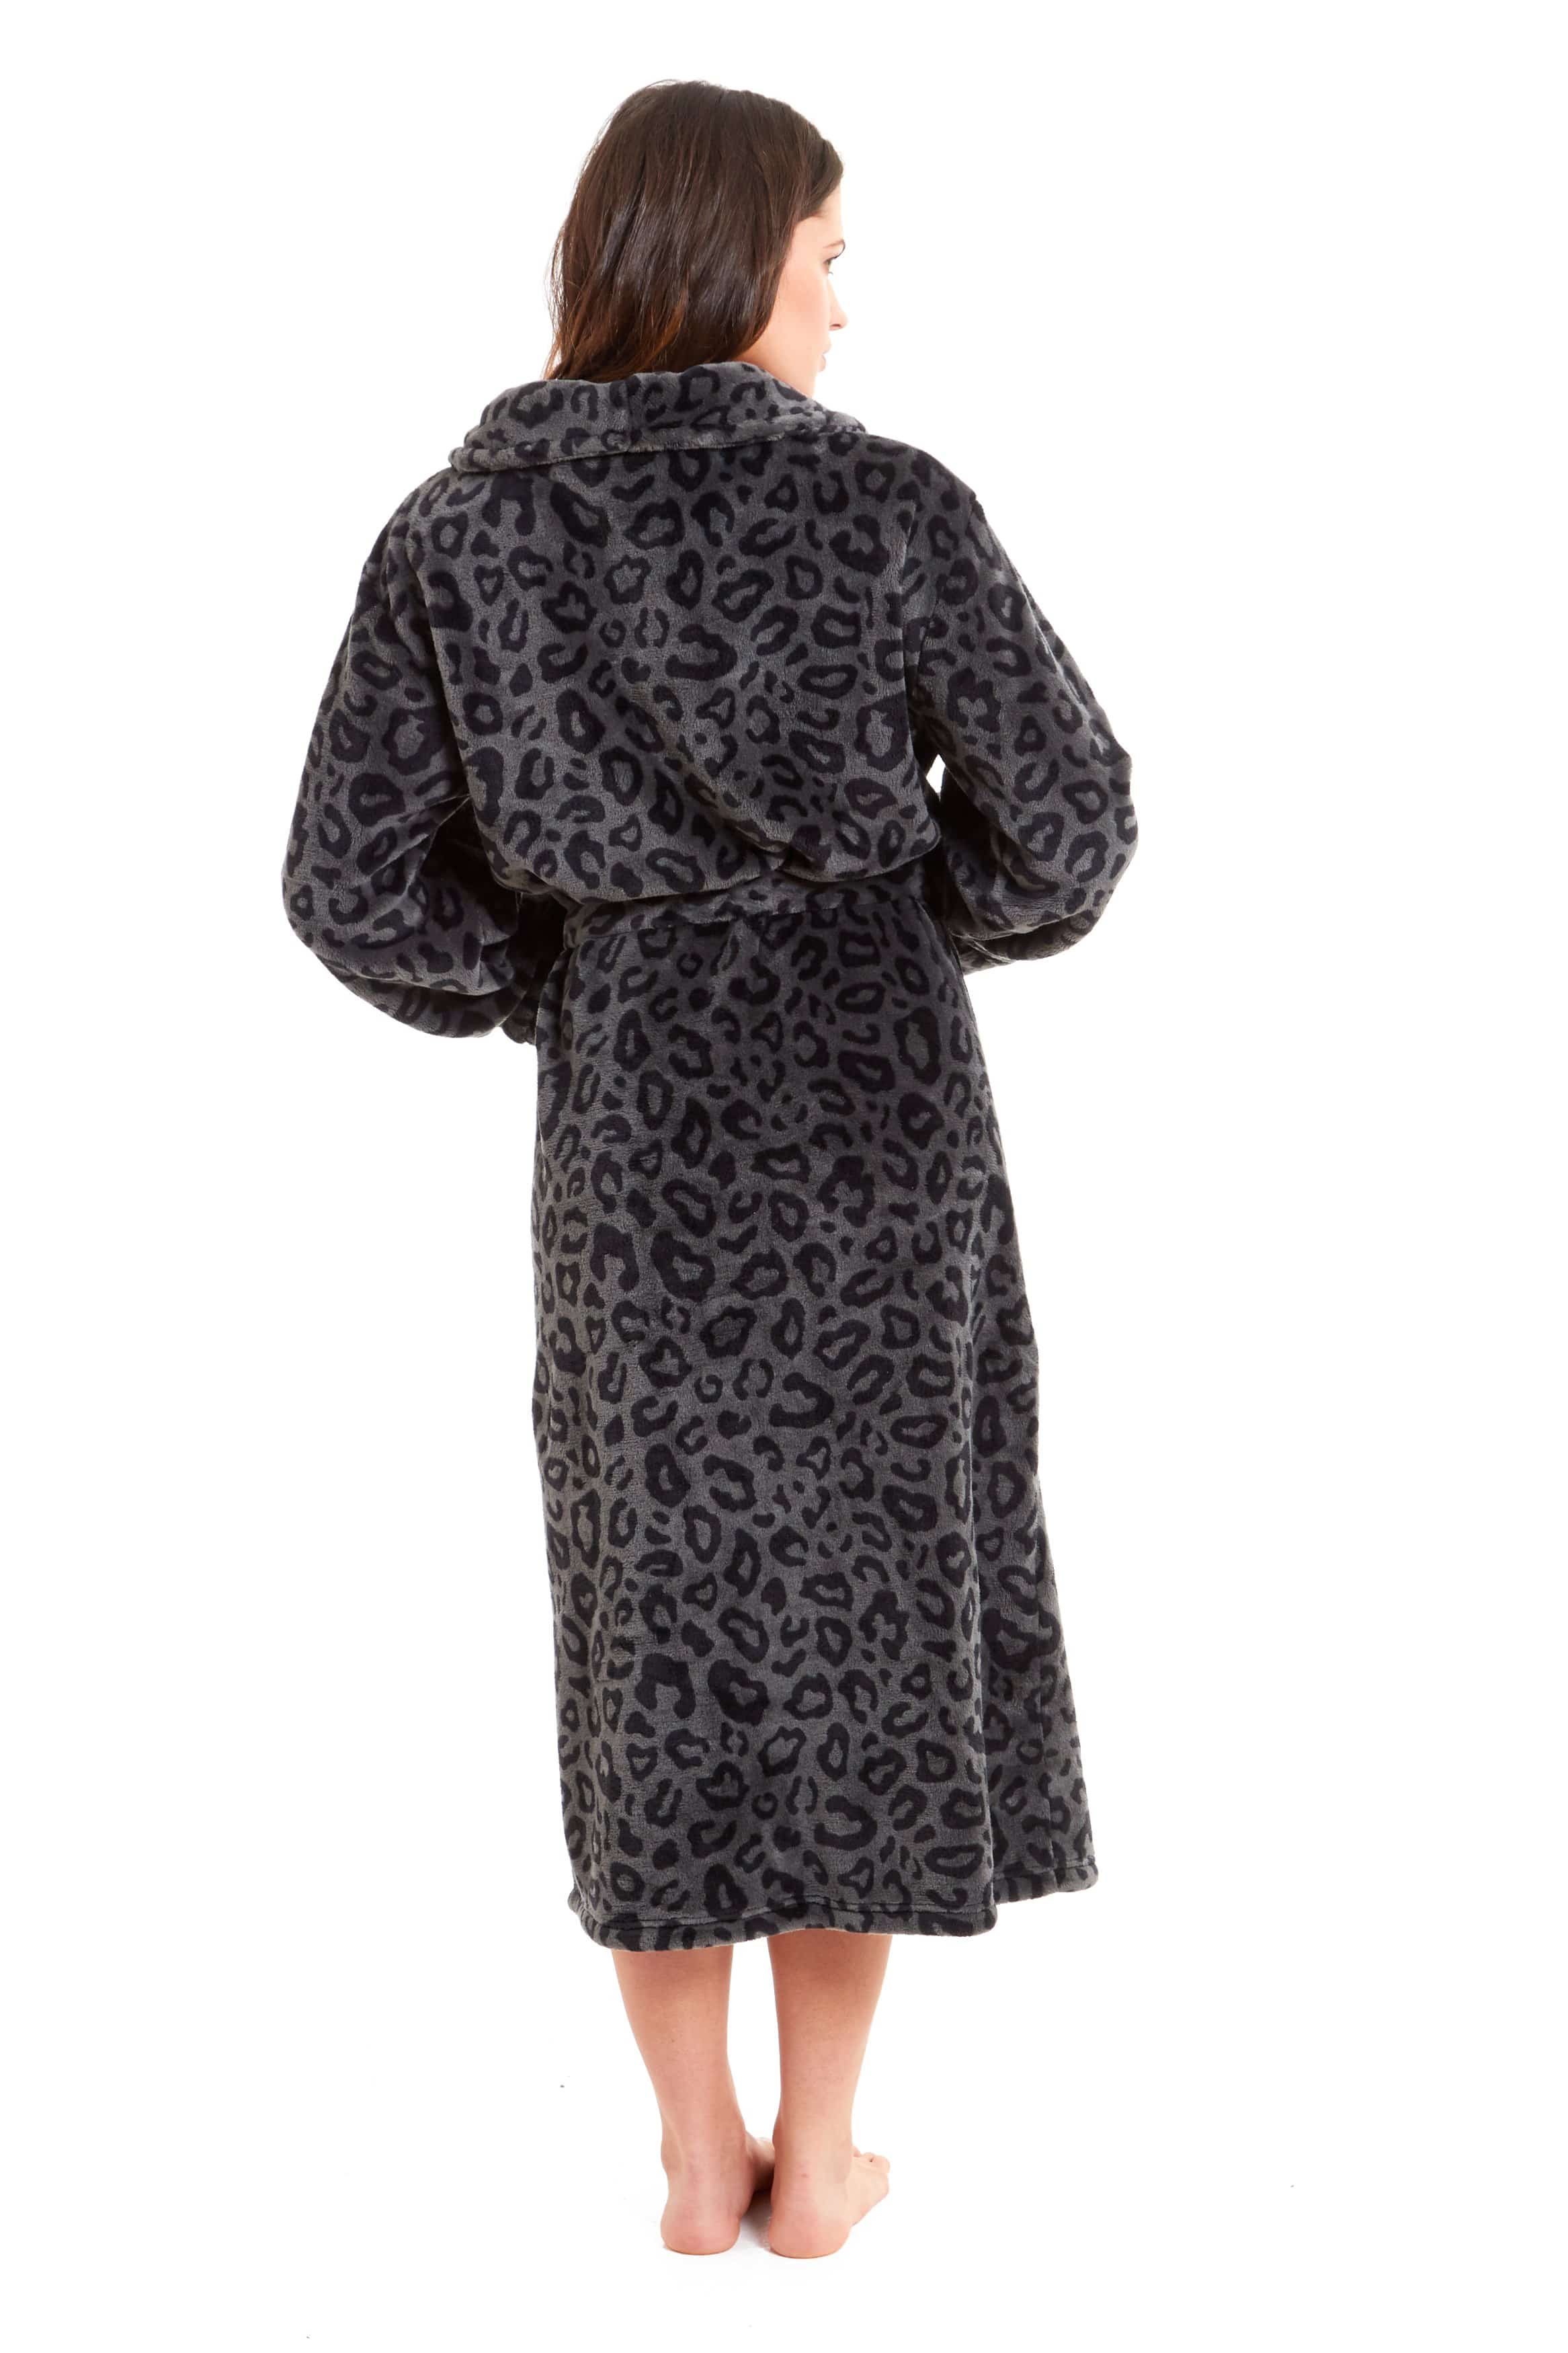 Womens Sherpa Fleece Bath Robe, Fluffy Plush Bathrobe Great Mothers Day  Gift Present for Mom, Grandma, Daughter, Sister, Wife at Amazon Women's  Clothing store